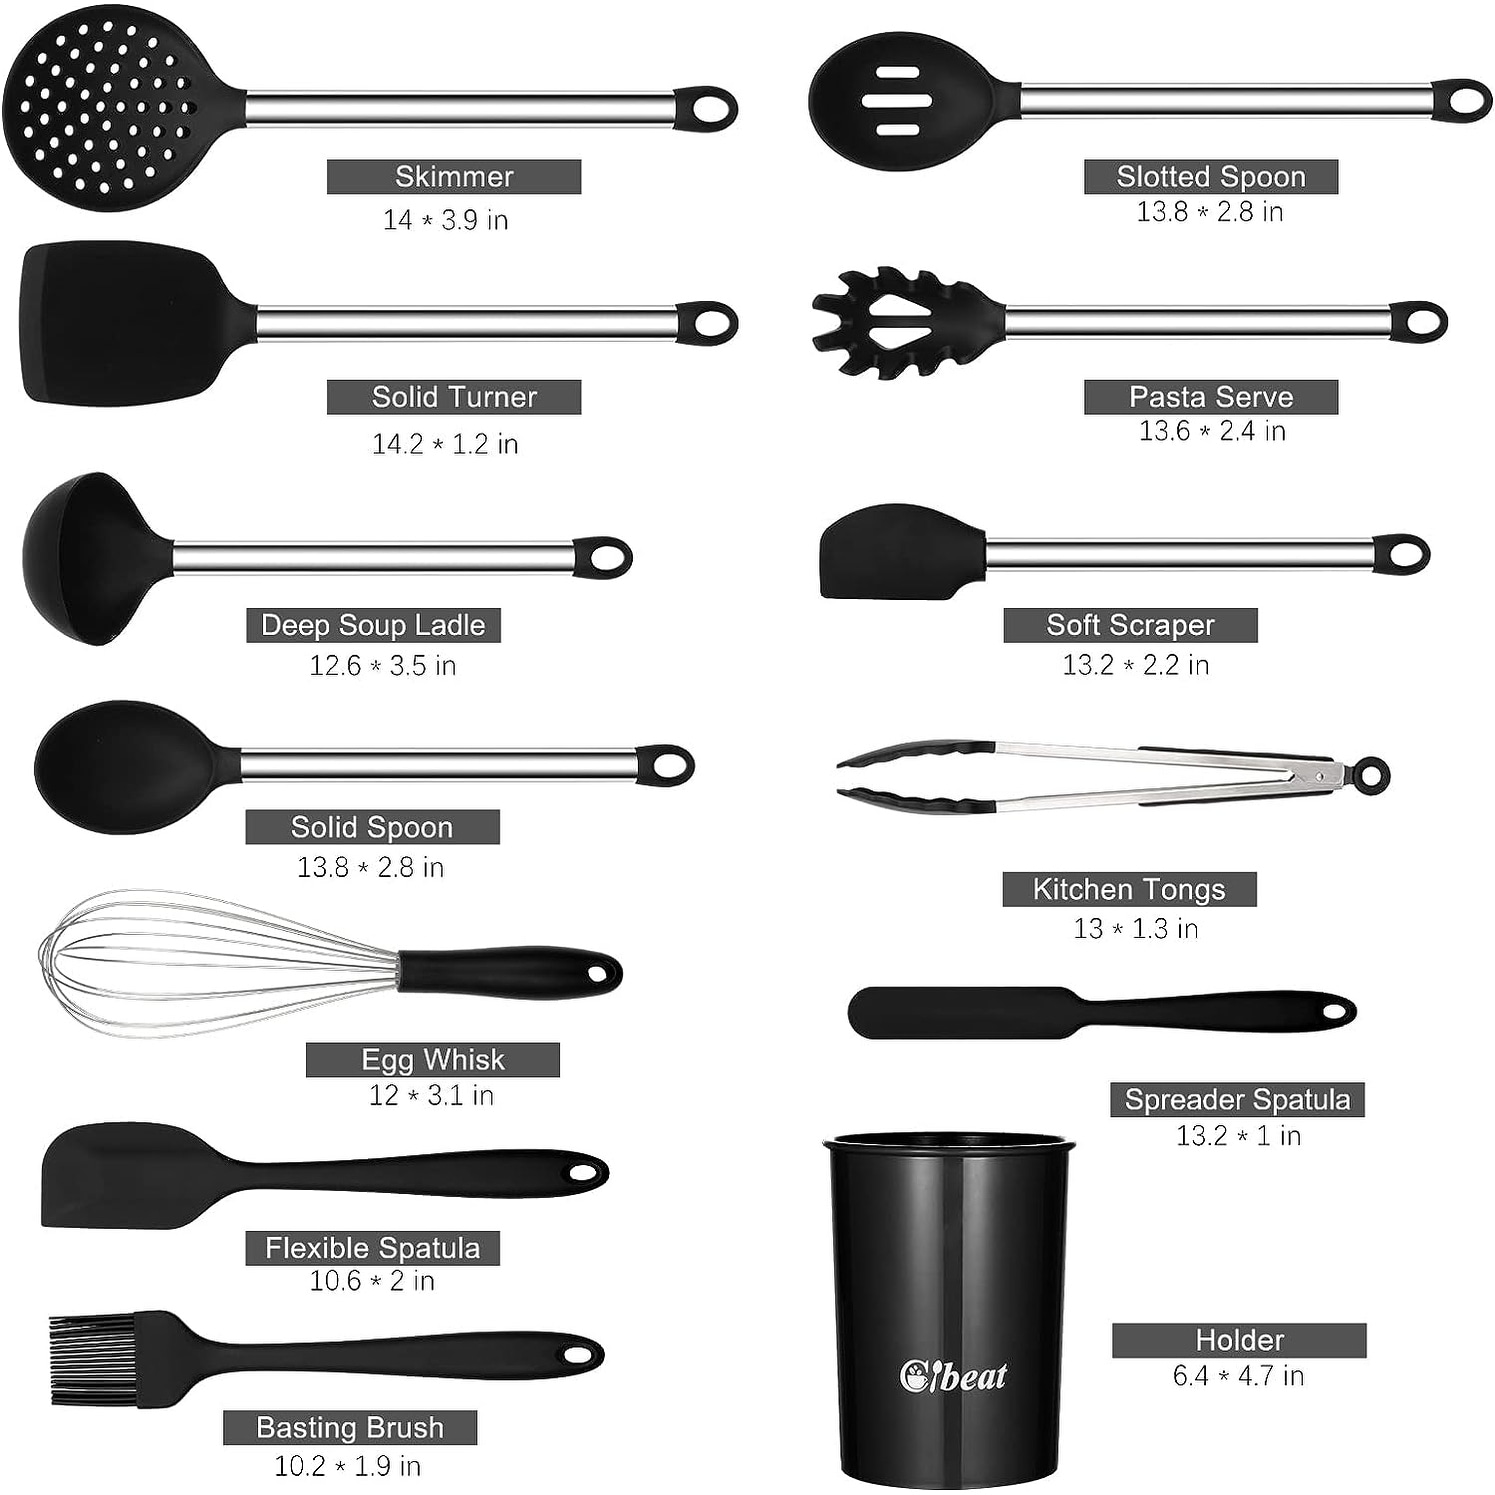 https://ak1.ostkcdn.com/images/products/is/images/direct/14e338691c38d395d4f7c24037b0b2a16e5adee1/Kitchen-Utensils-Set-with-Holder%2C-Silicone-Cooking-Utensils-Gadget.jpg